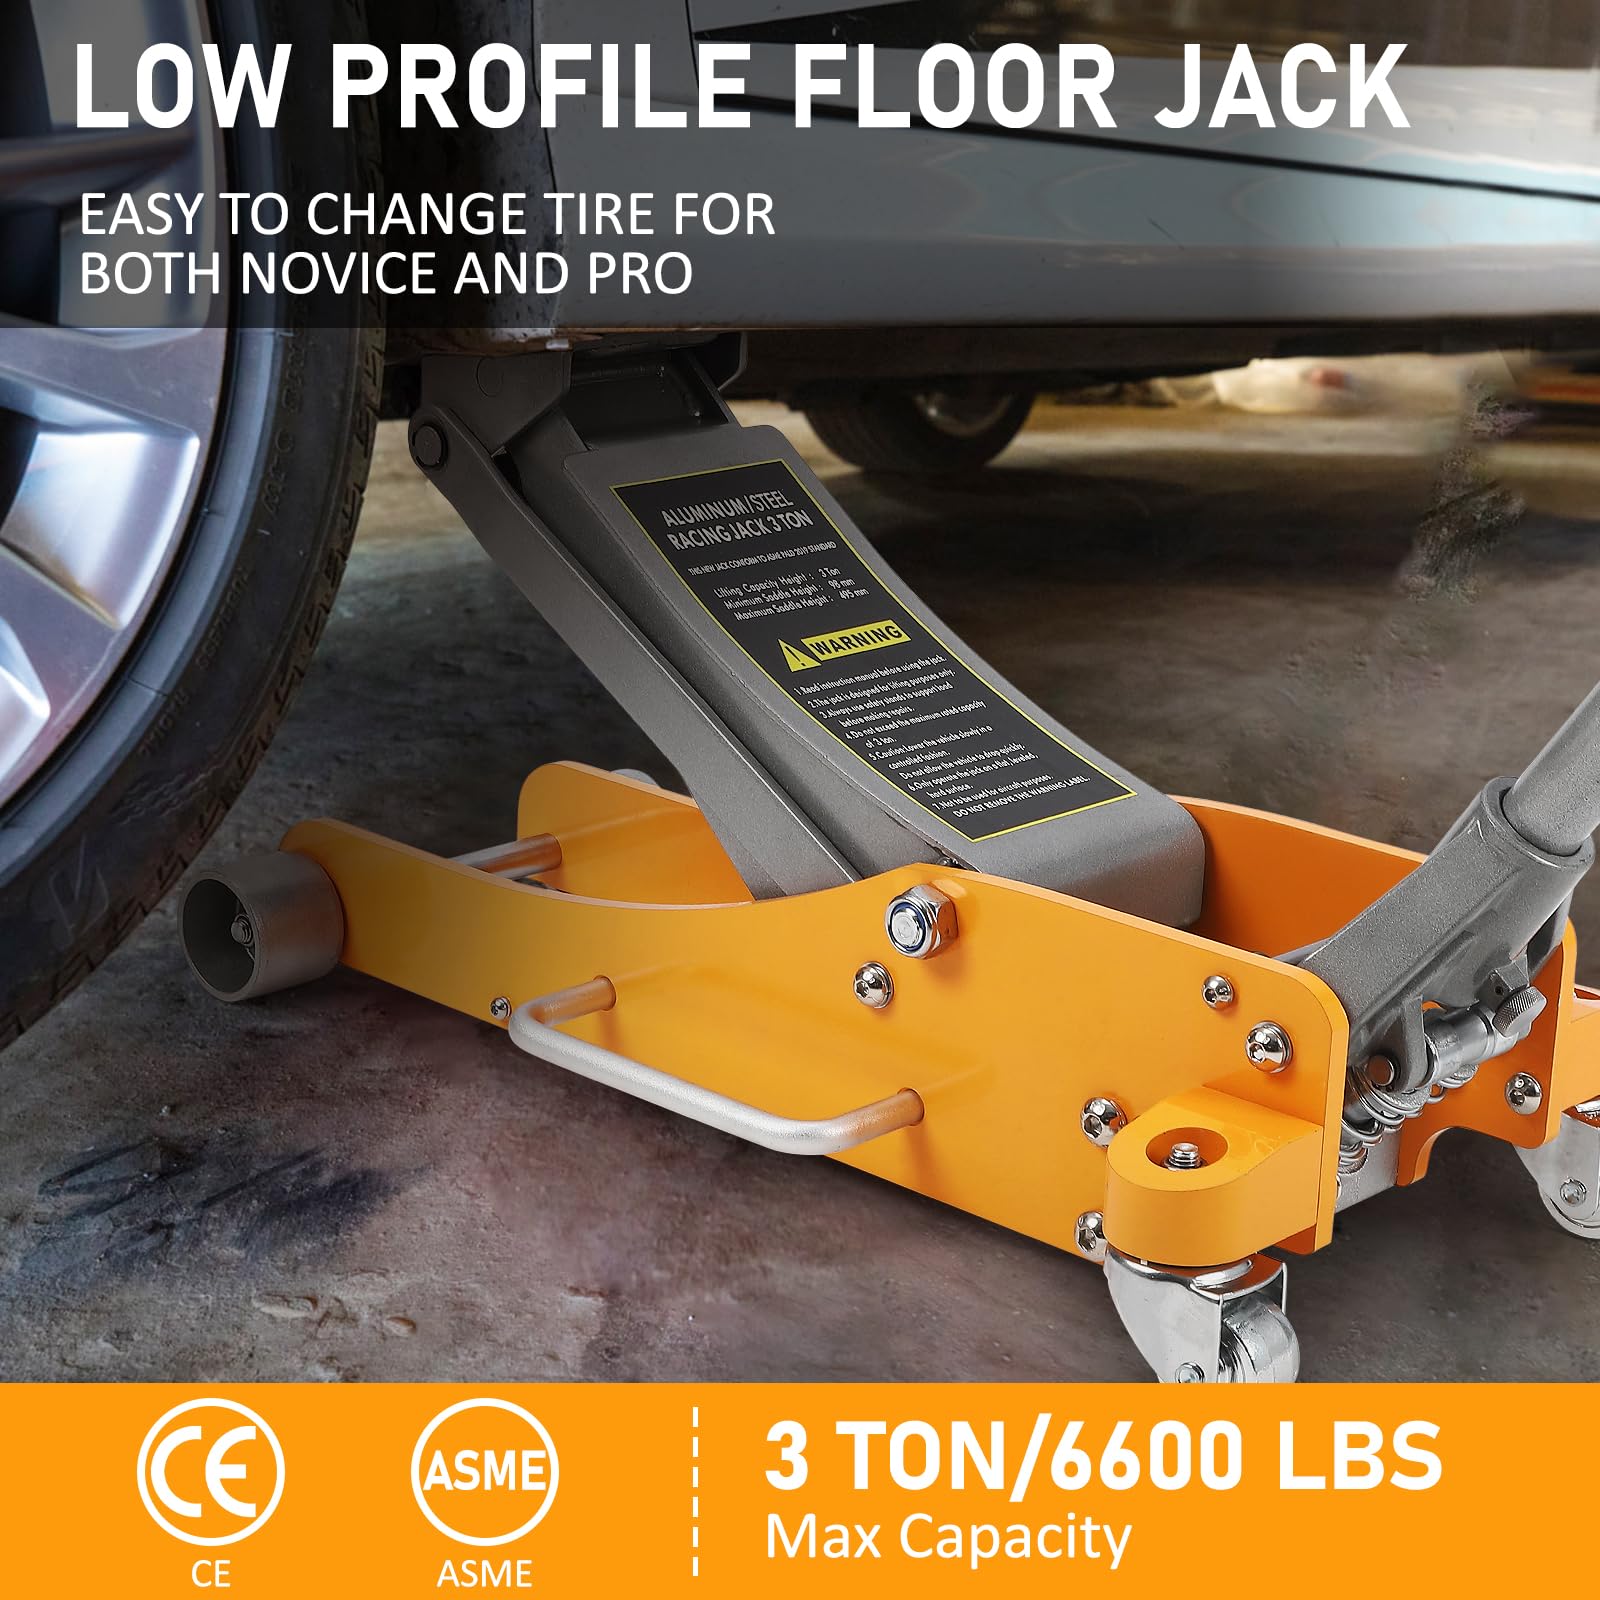 3 Ton Floor Jack Low Profile, Aluminum and Steel Hydraulic Floor Jack with Dual Pistons Quick Lift Pump, Lifting Range 3.86-19.49 Inch